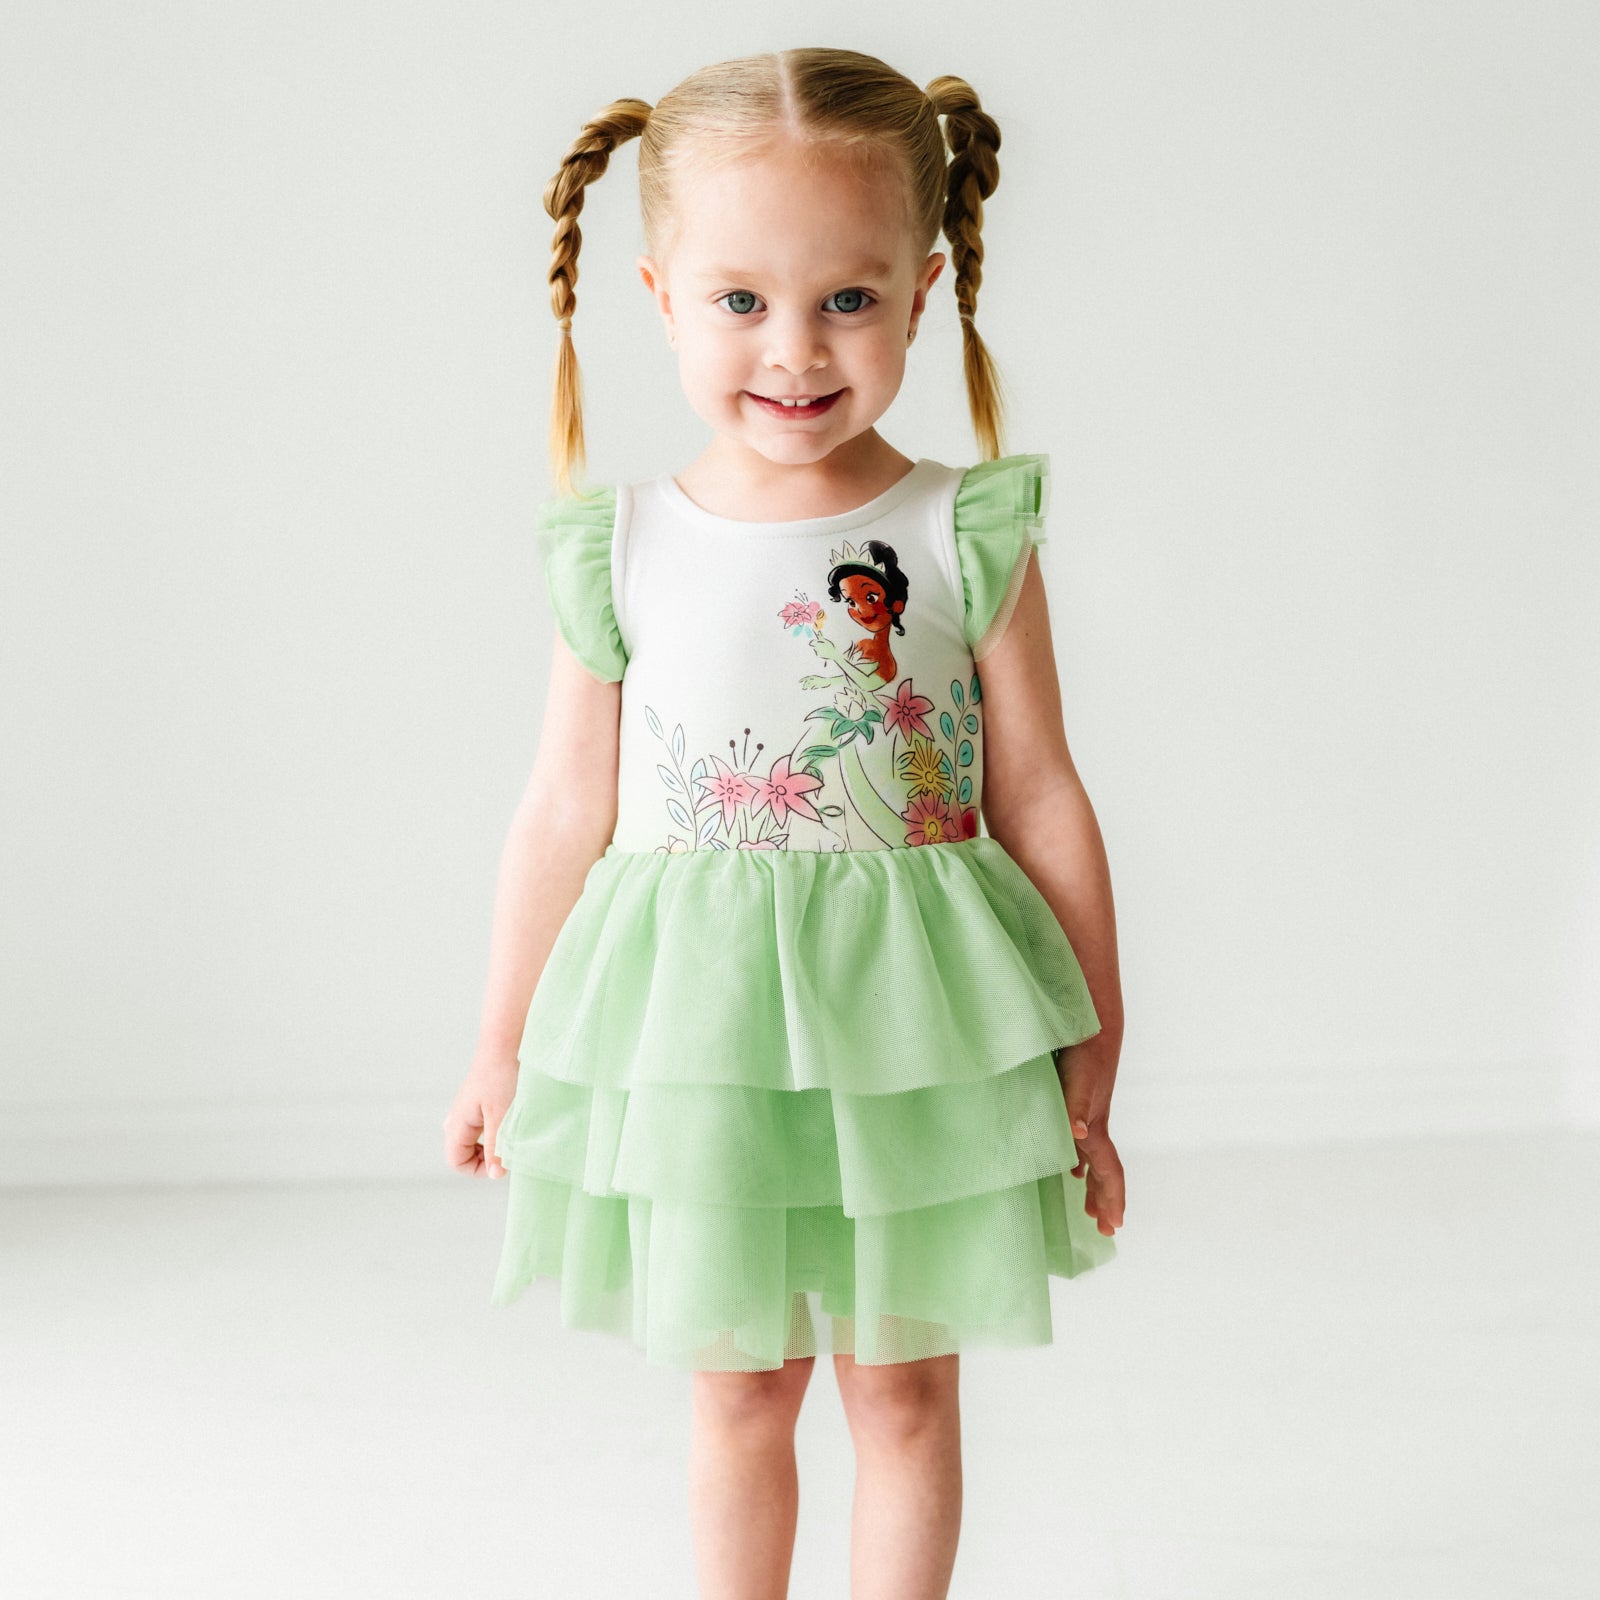 Child wearing a Tiana flutter tiered tutu dress with bloomer